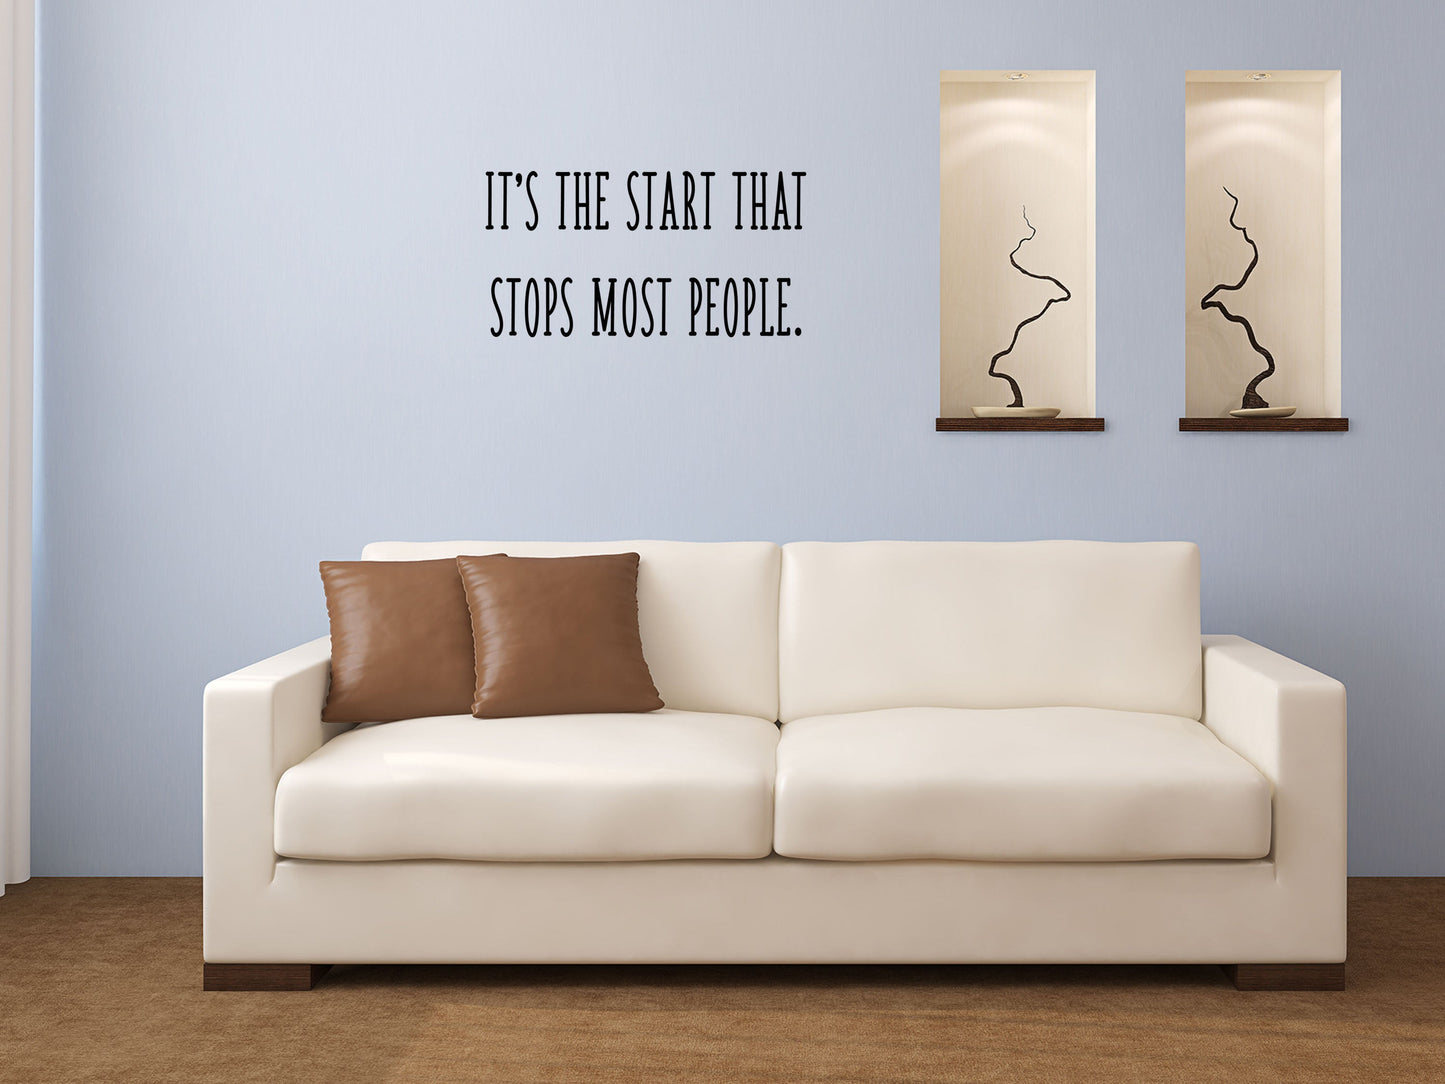 It's The Start That Stops Most People Encouraging Wall Sticker Vinyl Wall Decal Inspirational Wall Signs 